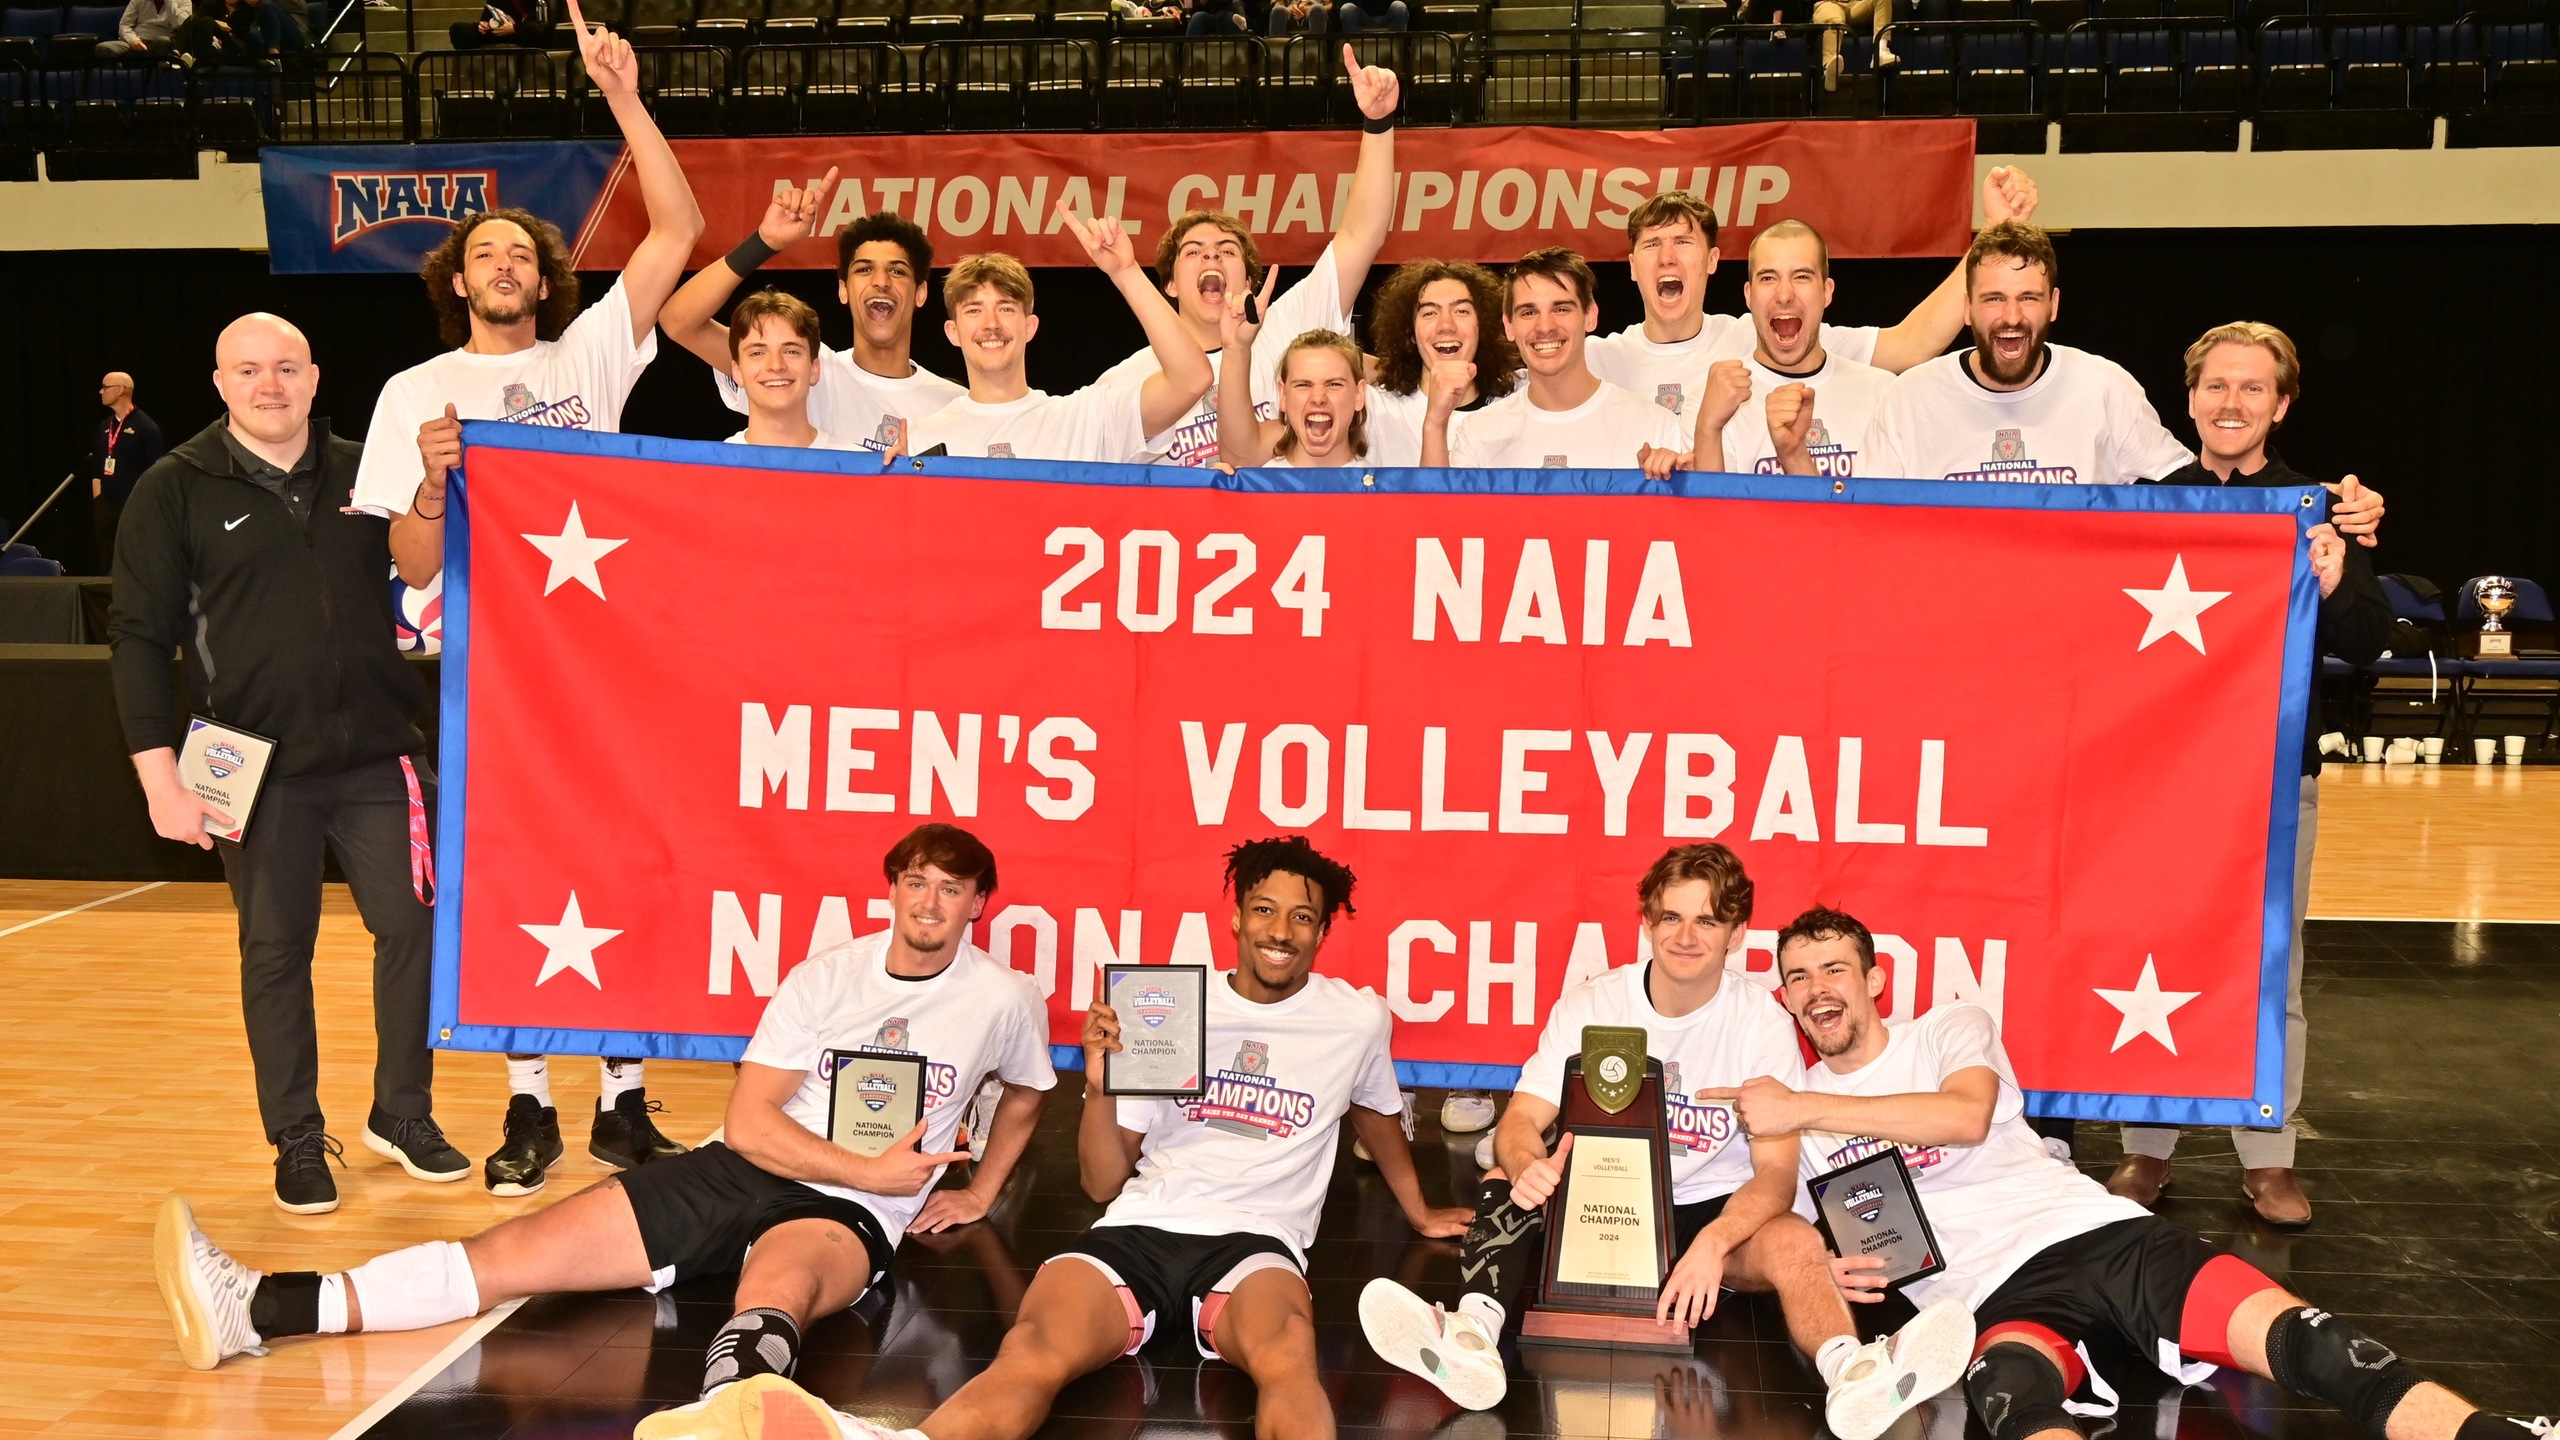 Men's Volleyball captures 2024 National Championship